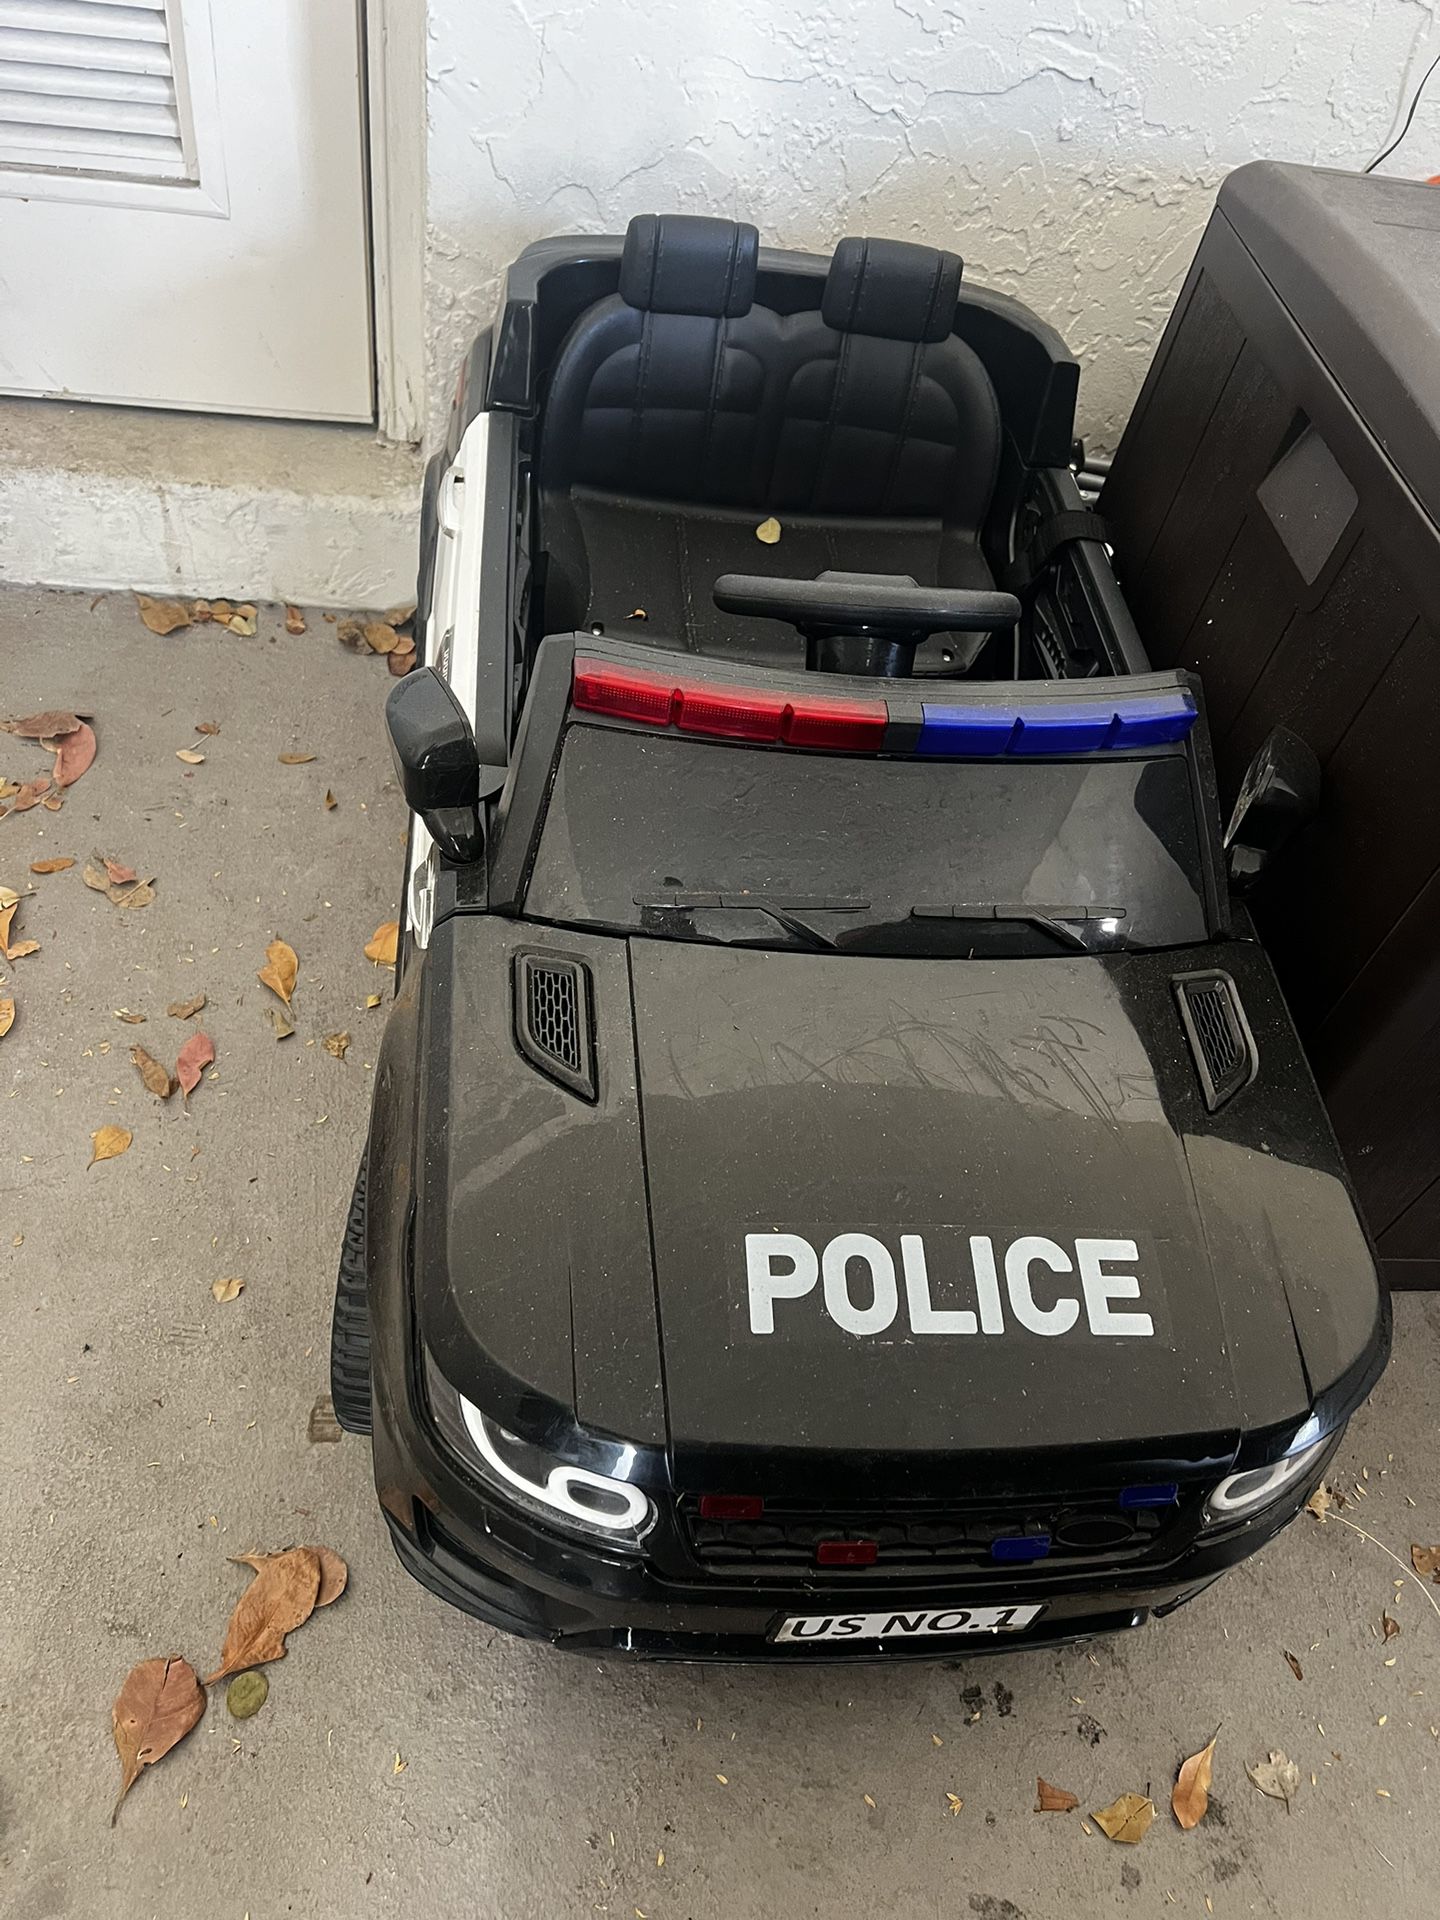 baby ride on police car battery powered with remote control, Bluetooth for music. And charger included.